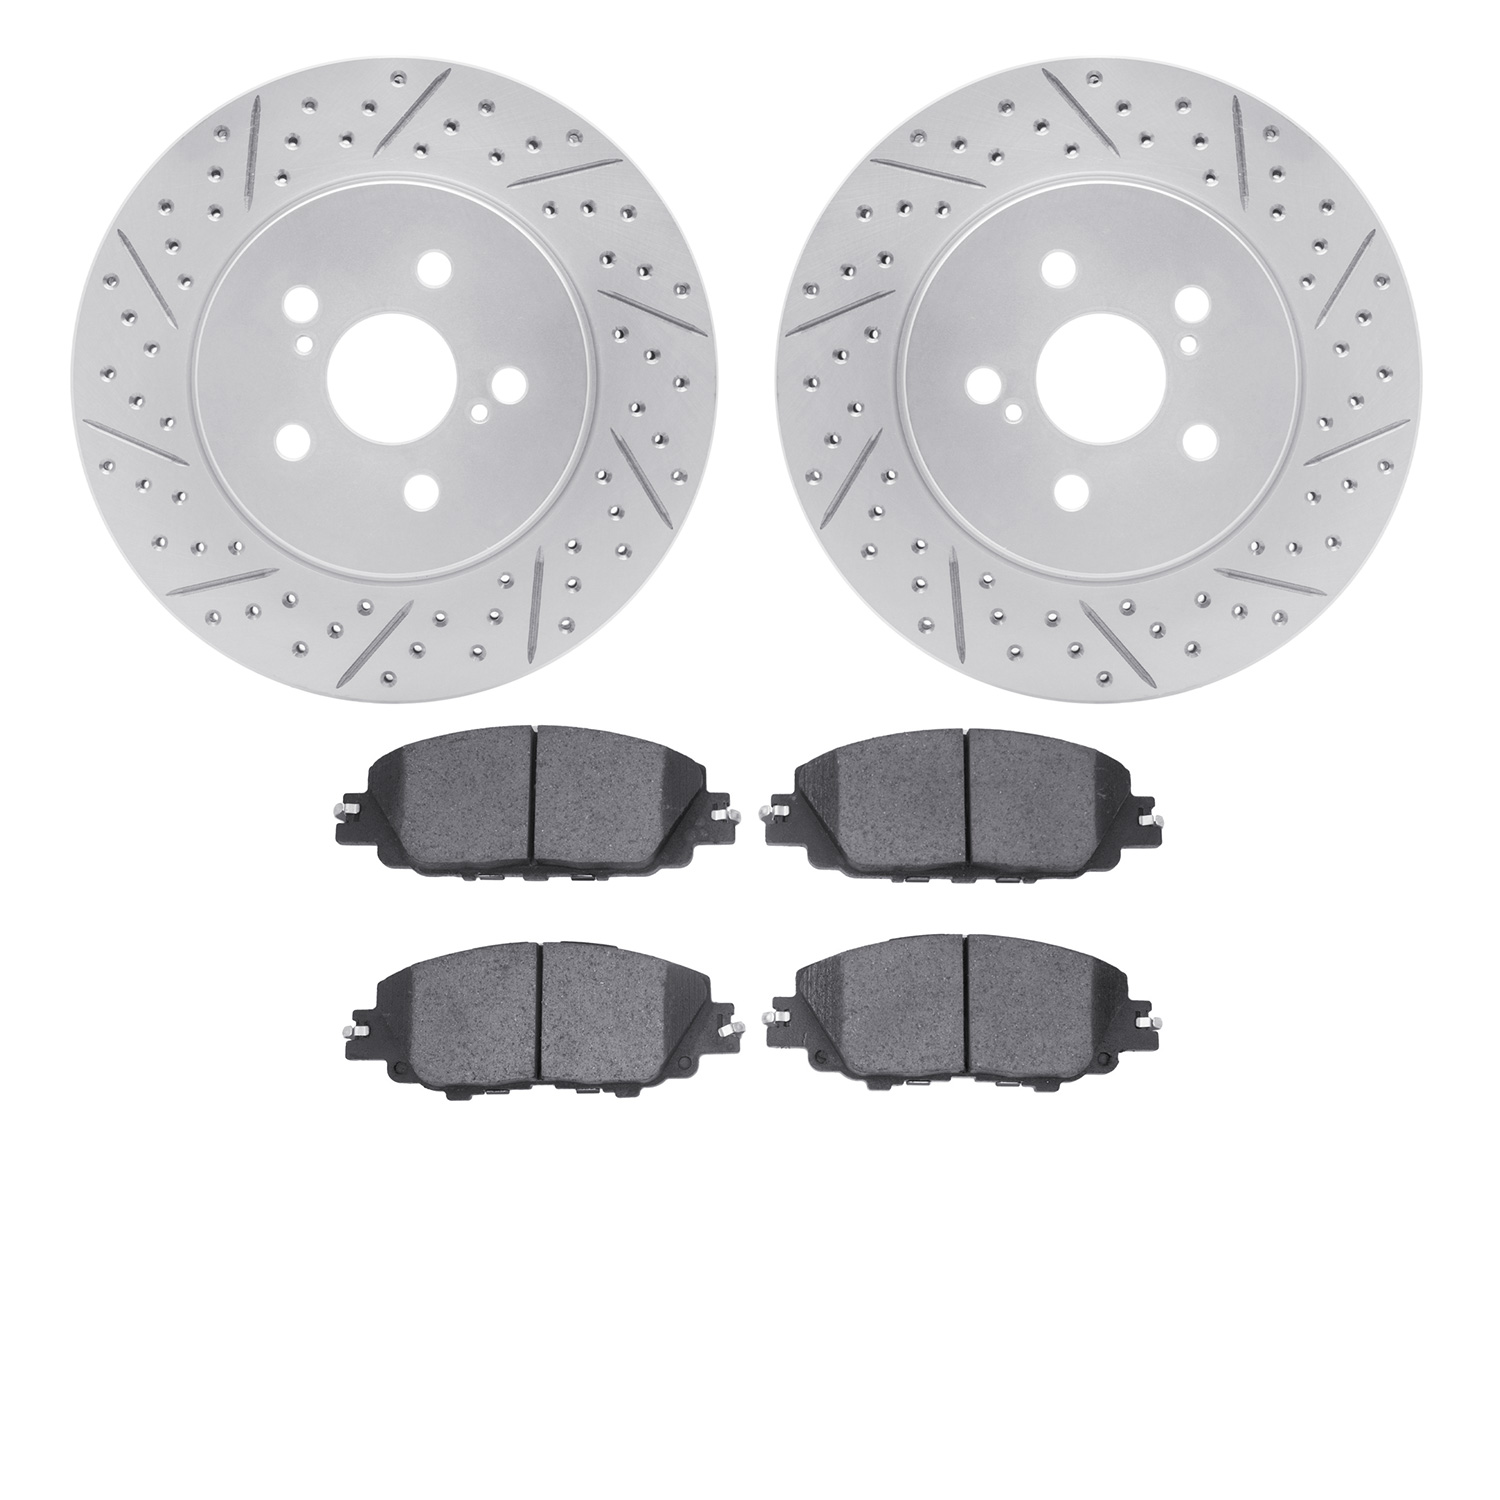 2502-76057 Geoperformance Drilled/Slotted Rotors w/5000 Advanced Brake Pads Kit, Fits Select Lexus/Toyota/Scion, Position: Front